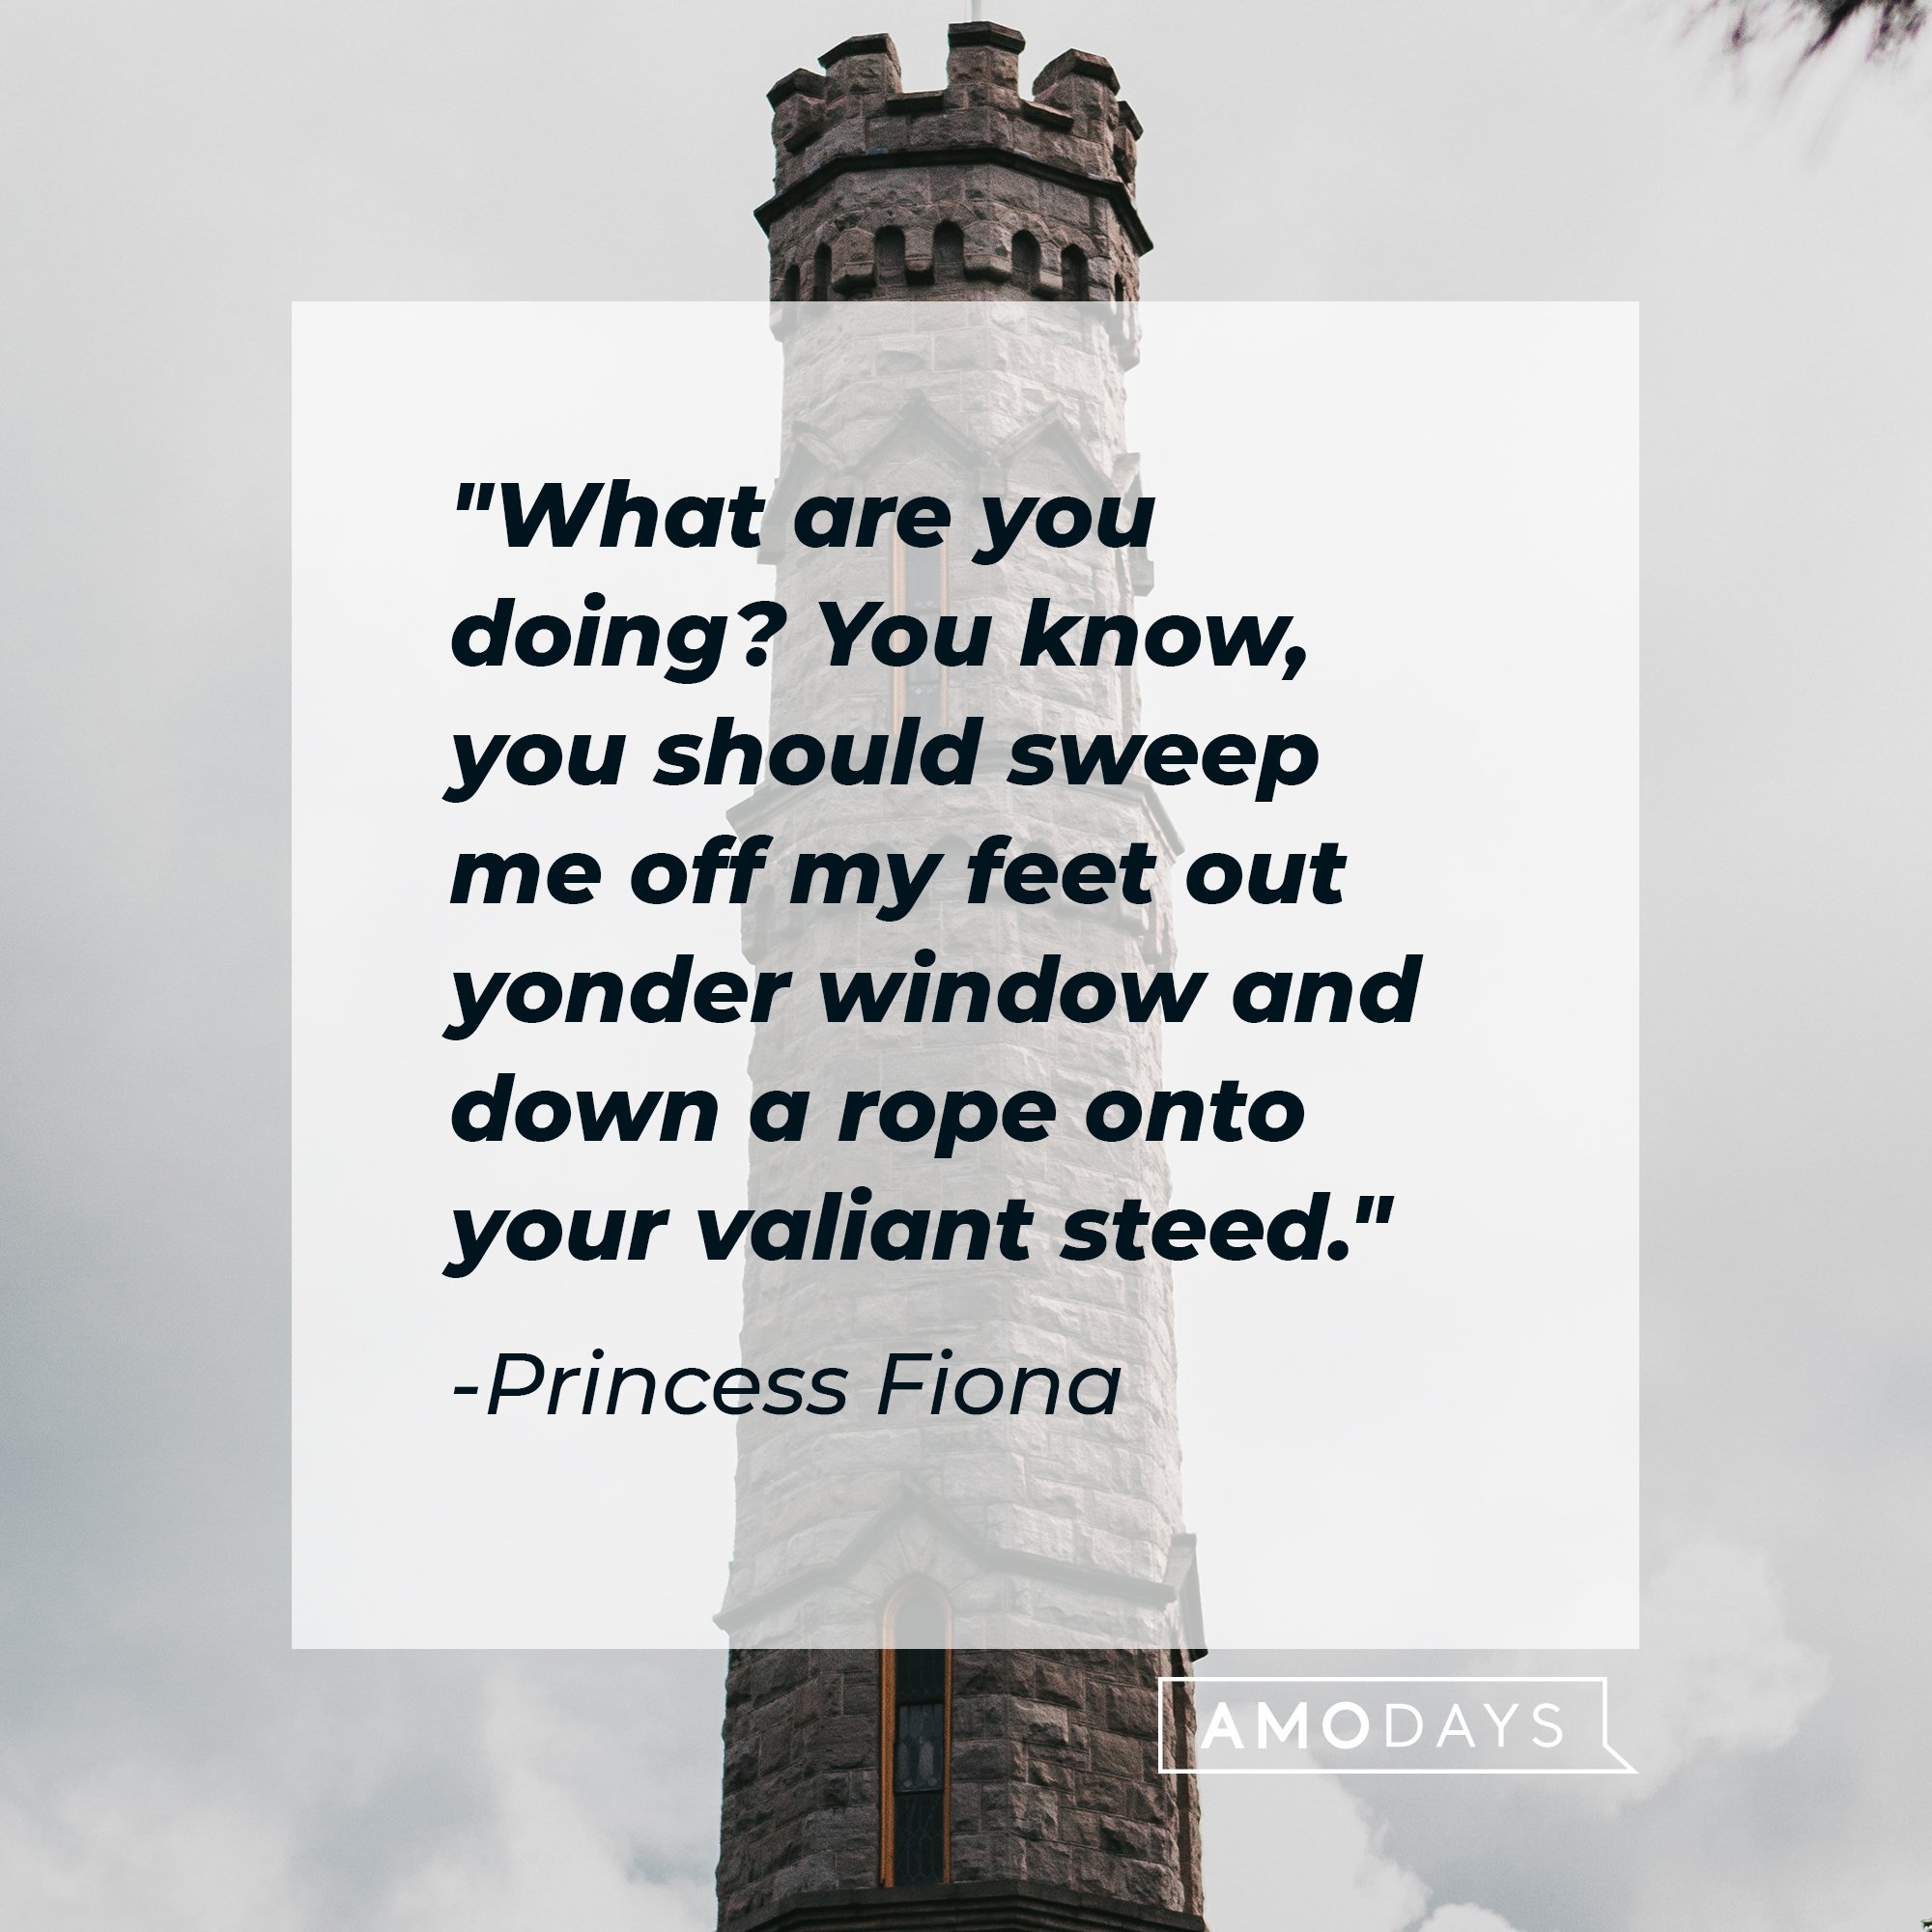 Princess Fiona's quote: "What are you doing? You know, you should sweep me off my feet out yonder window and down a rope onto your valiant steed." | Image: AmoDays